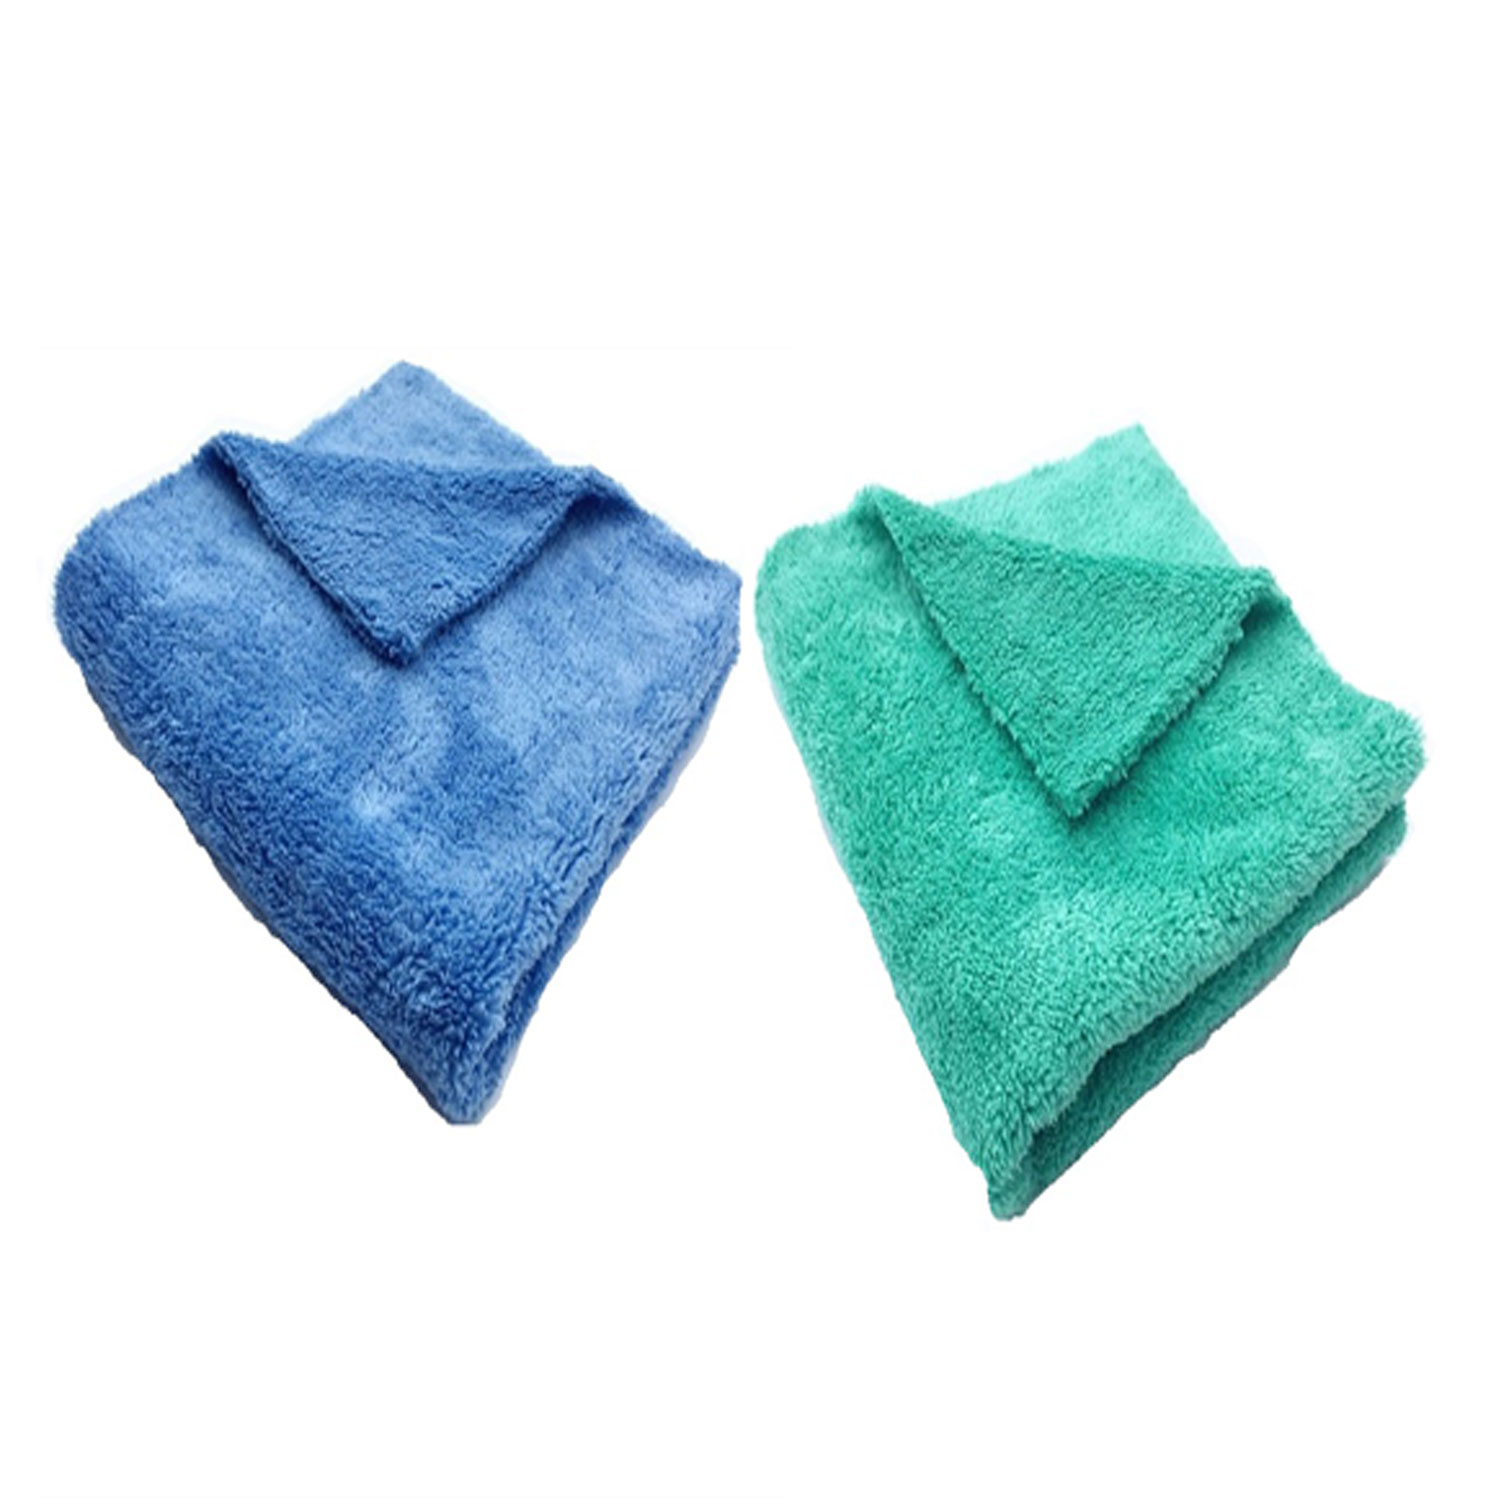 Sheen Microfiber cleaning cloth | Home cleaning cloth | Kitchen cleaning cloth 35X35 CM | 300 GSM | PACK OF 2